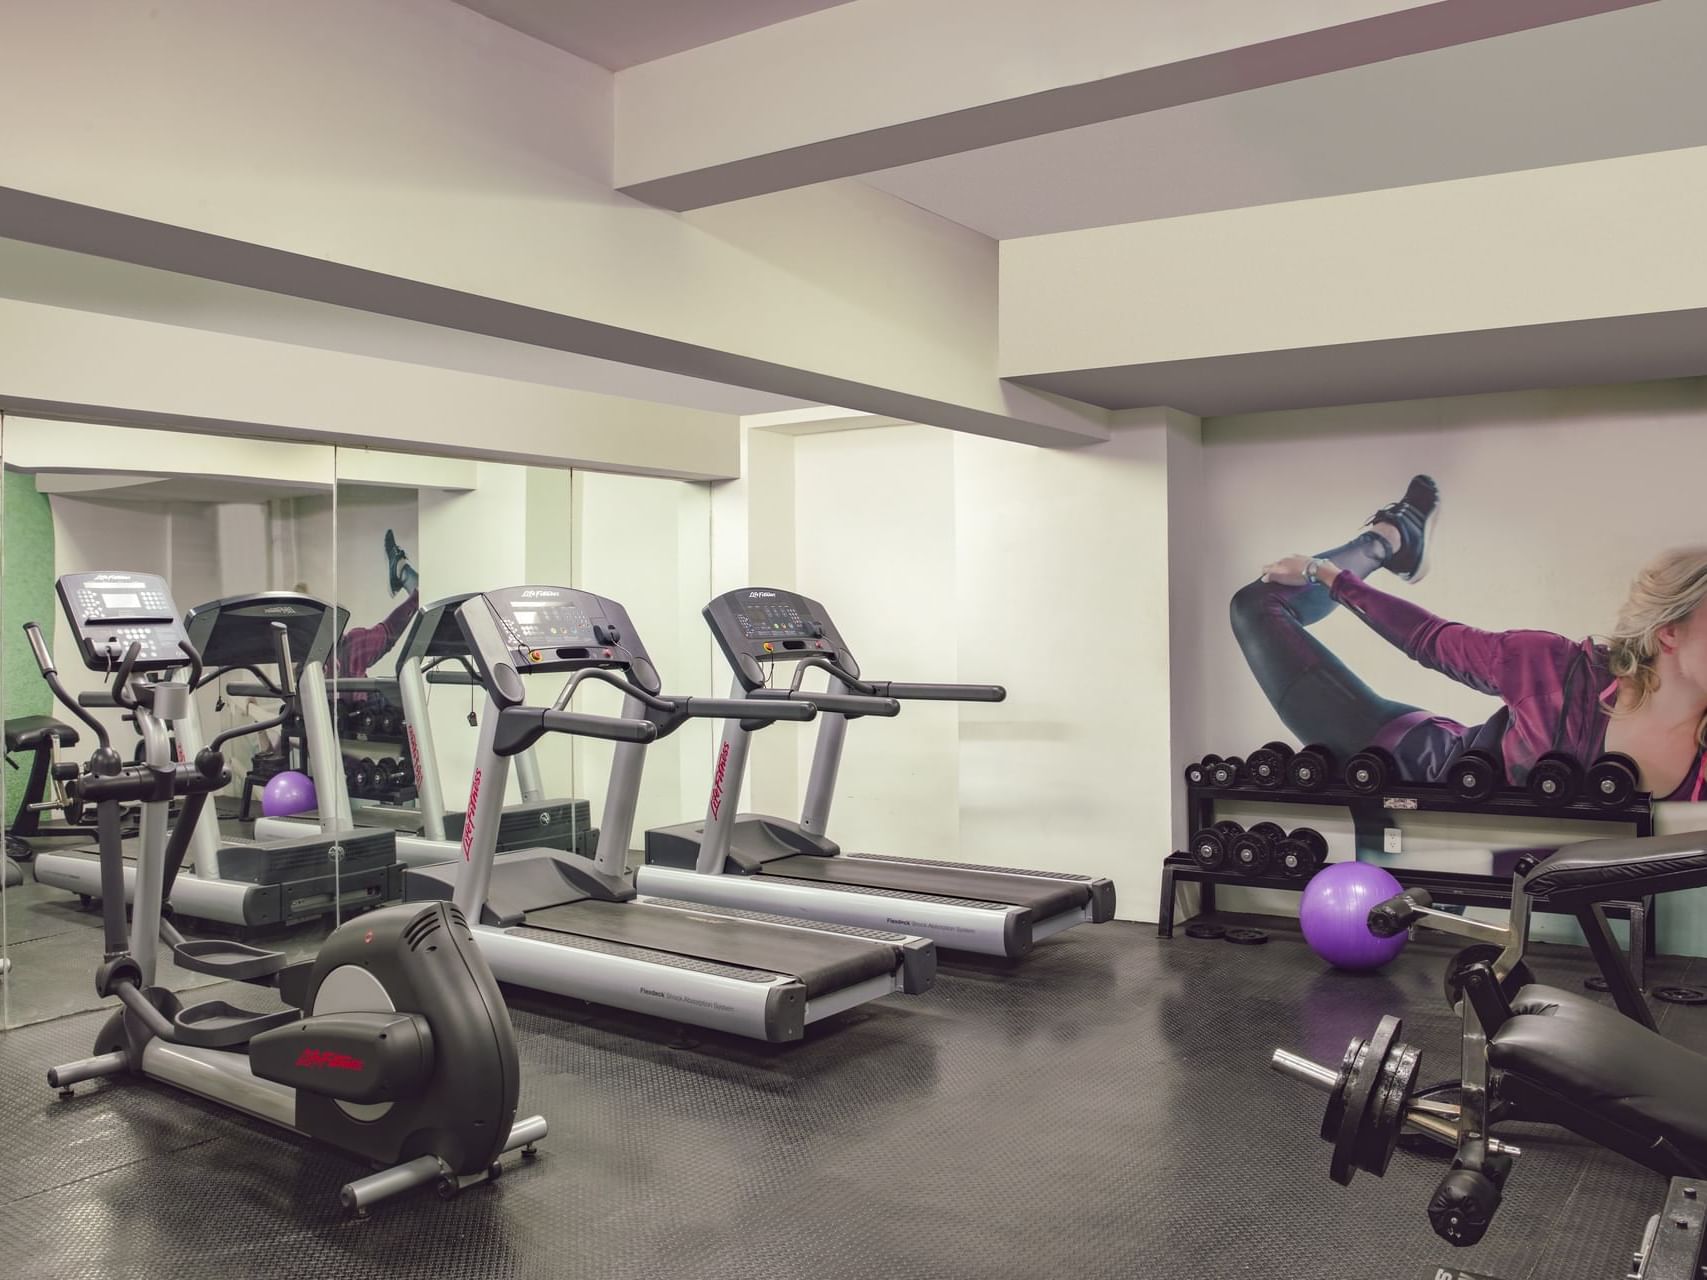 Gym equipment in the gymnasium at Gamma Hotels